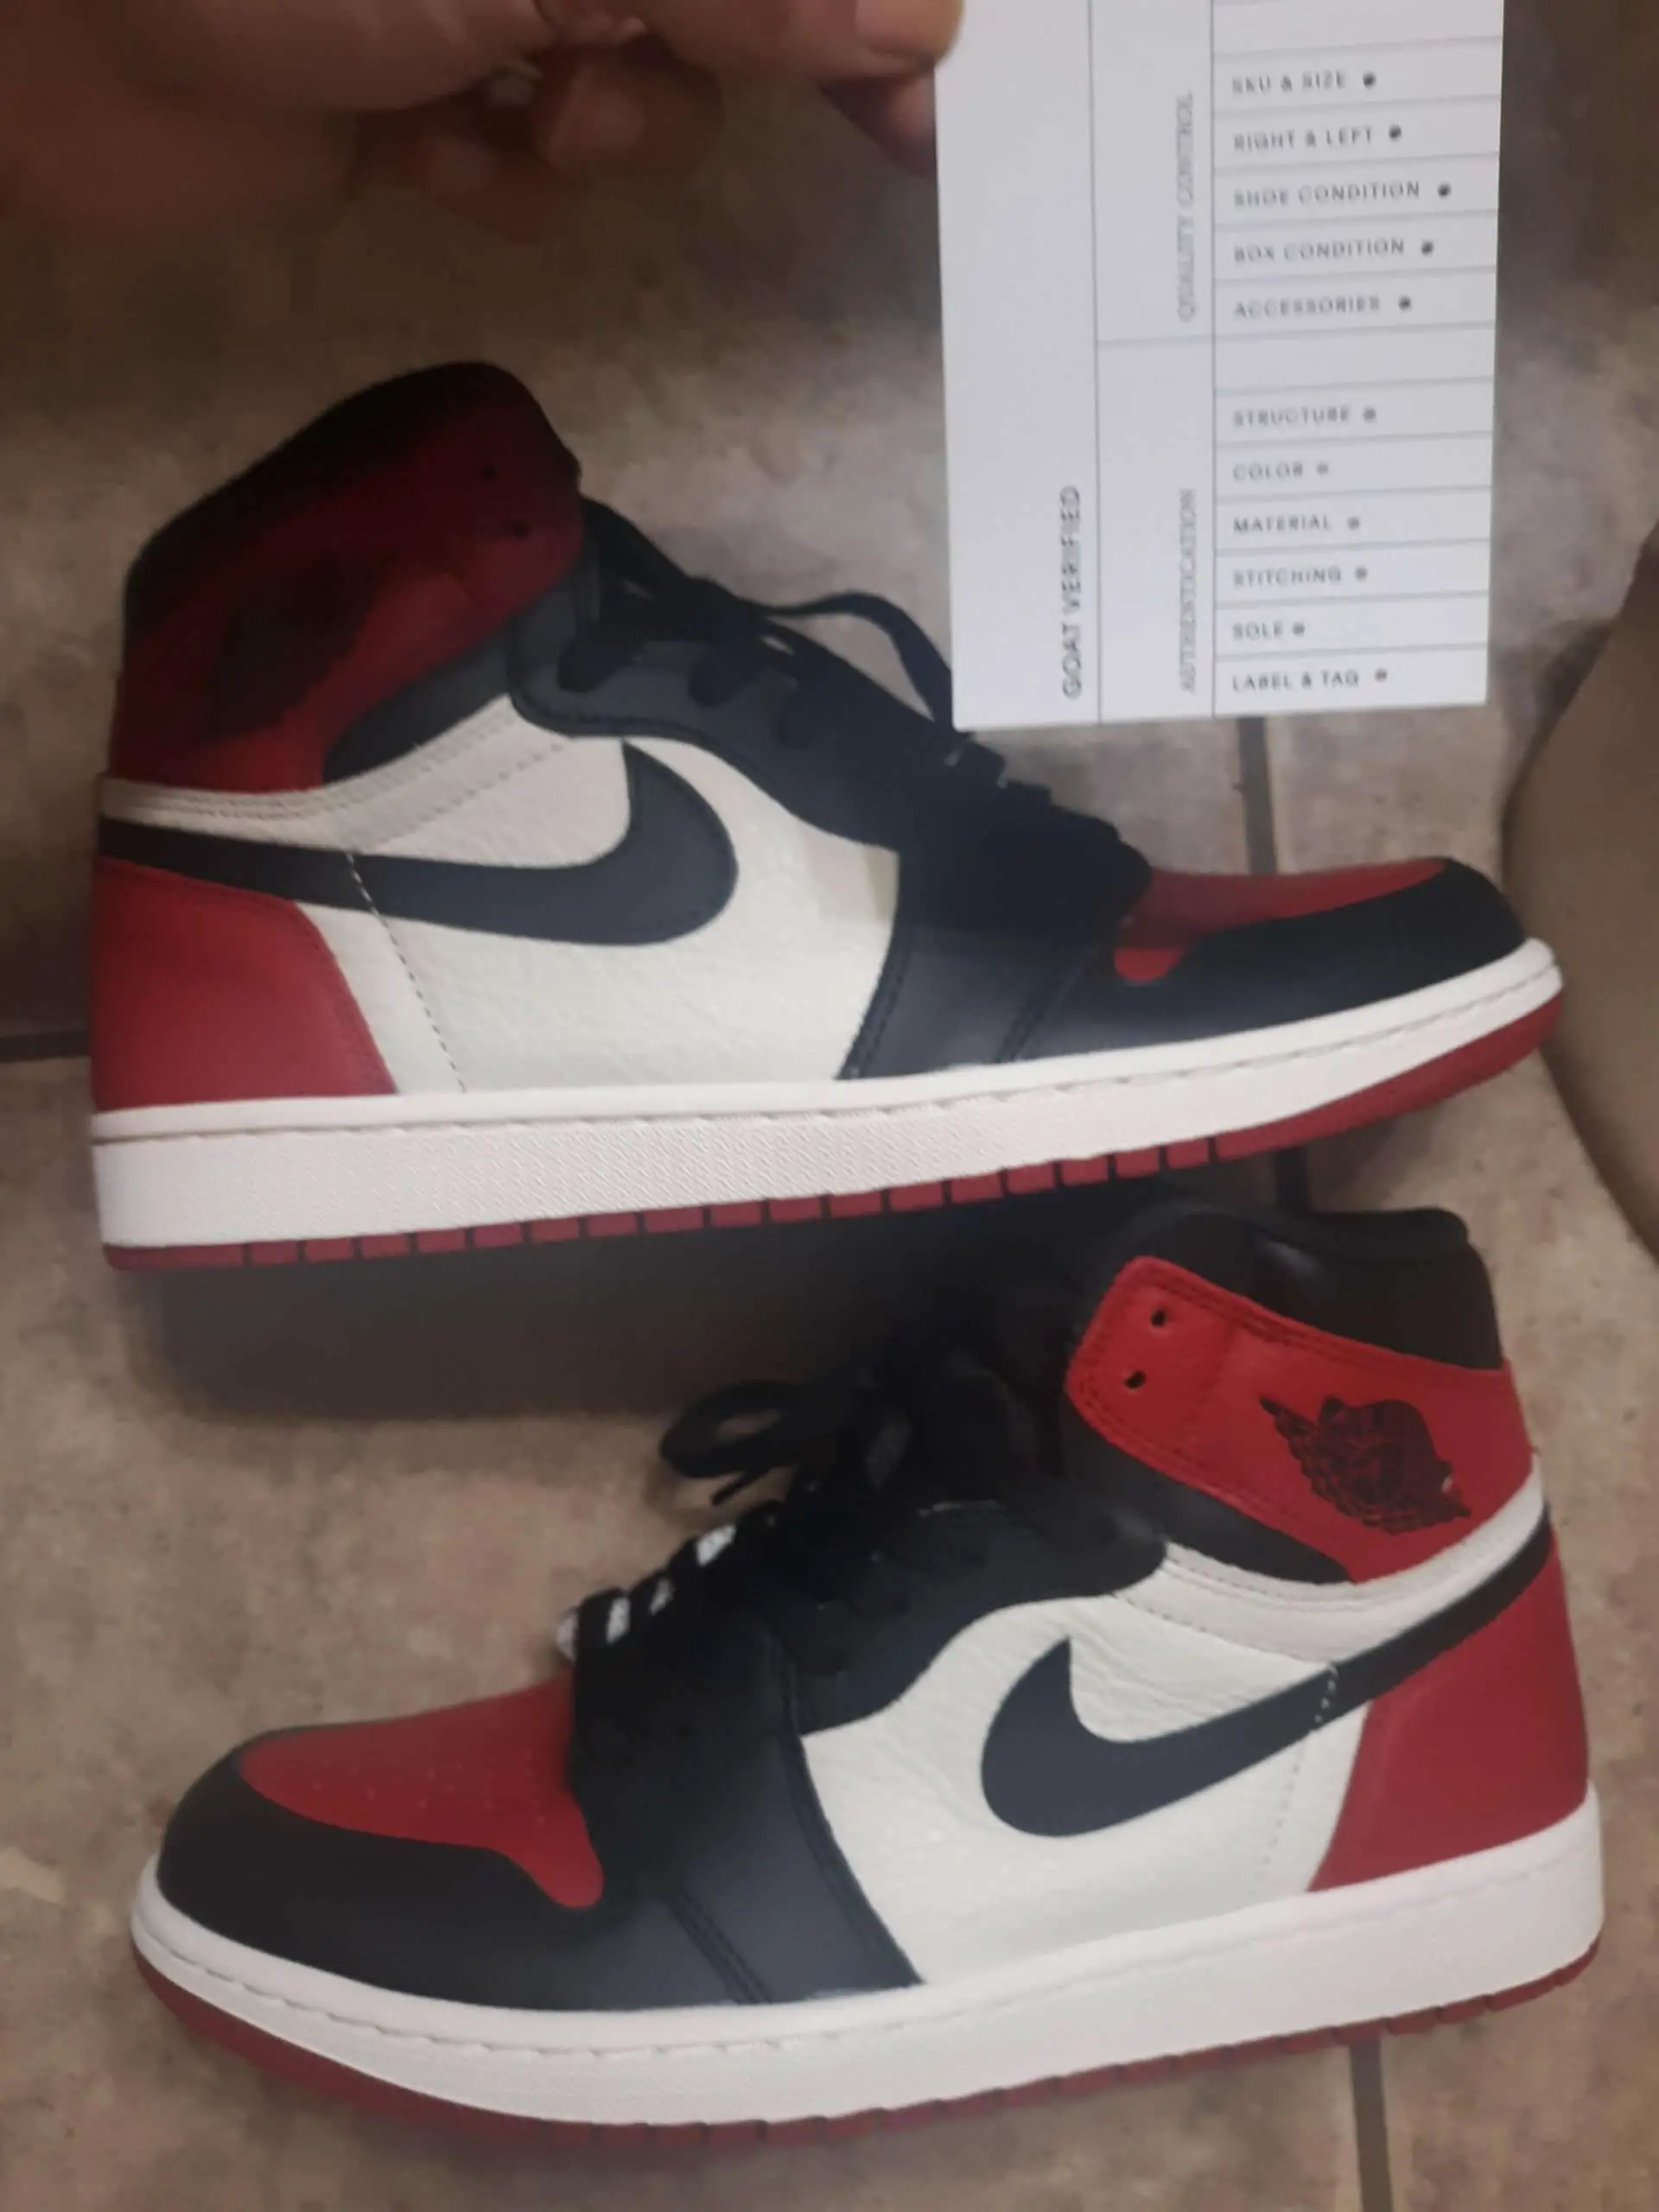 Got these from goat today... think I need a legit check ...